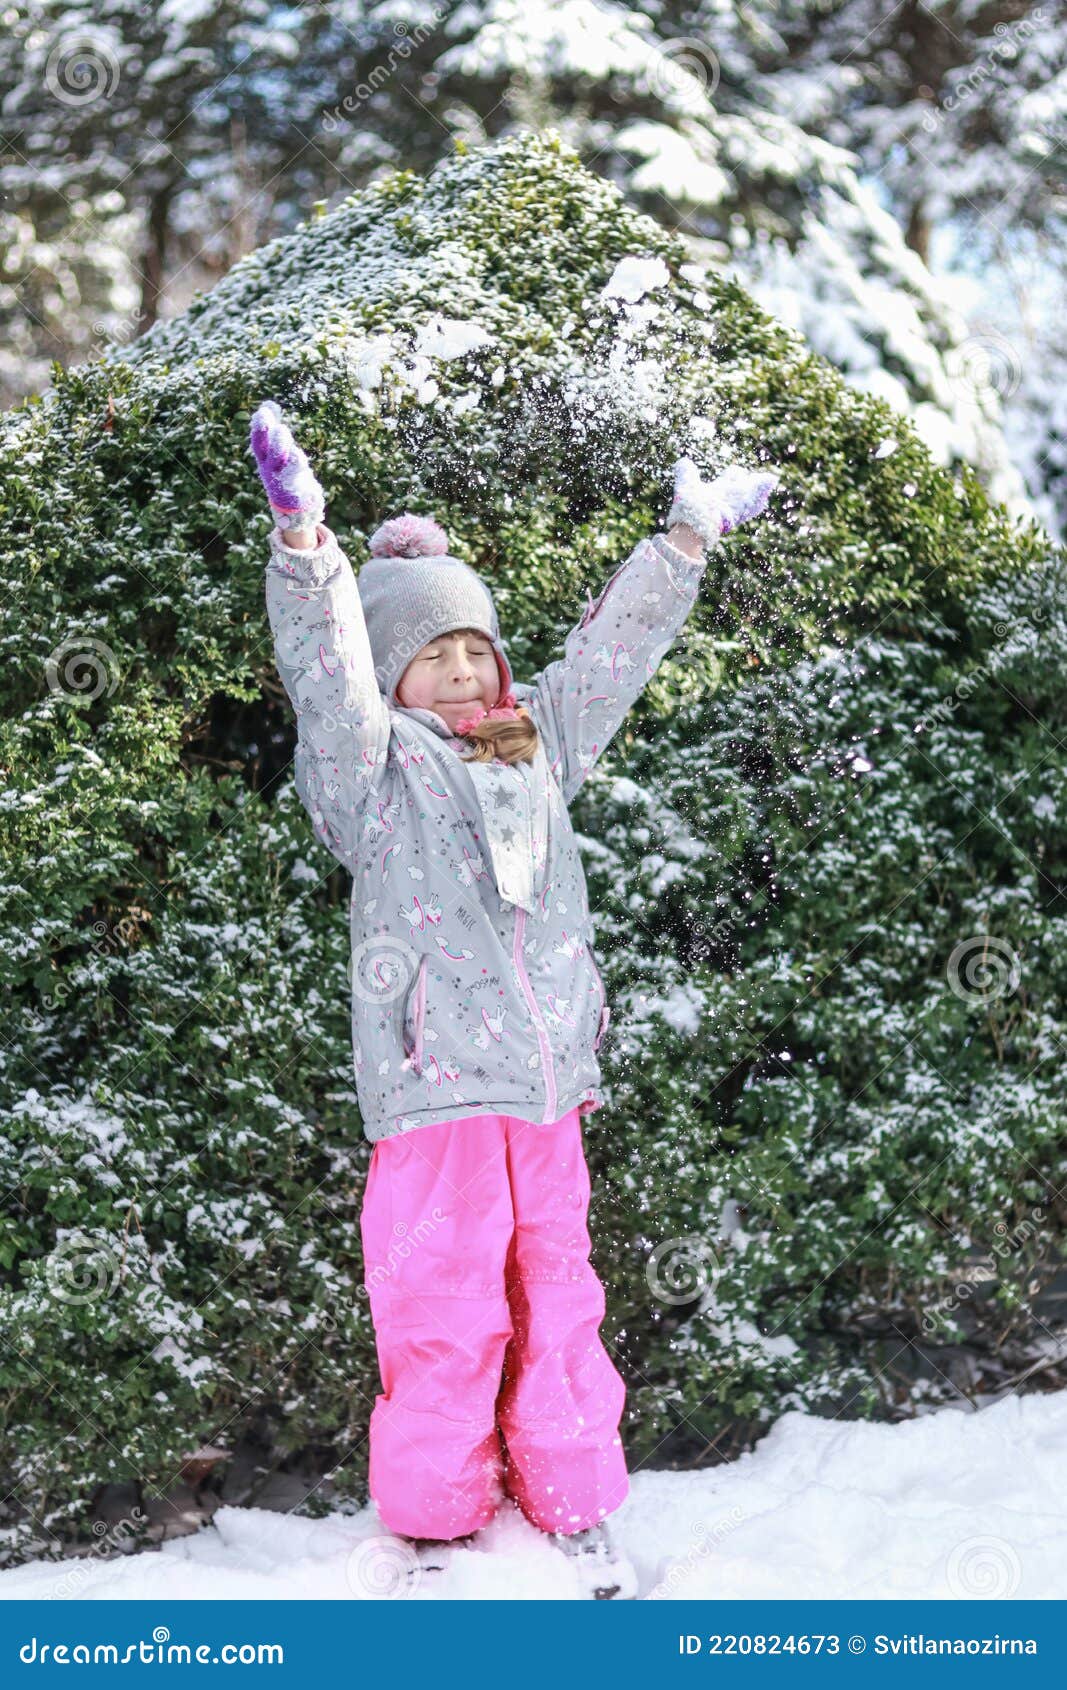 a child in a winter park throws snow over his head and blinks